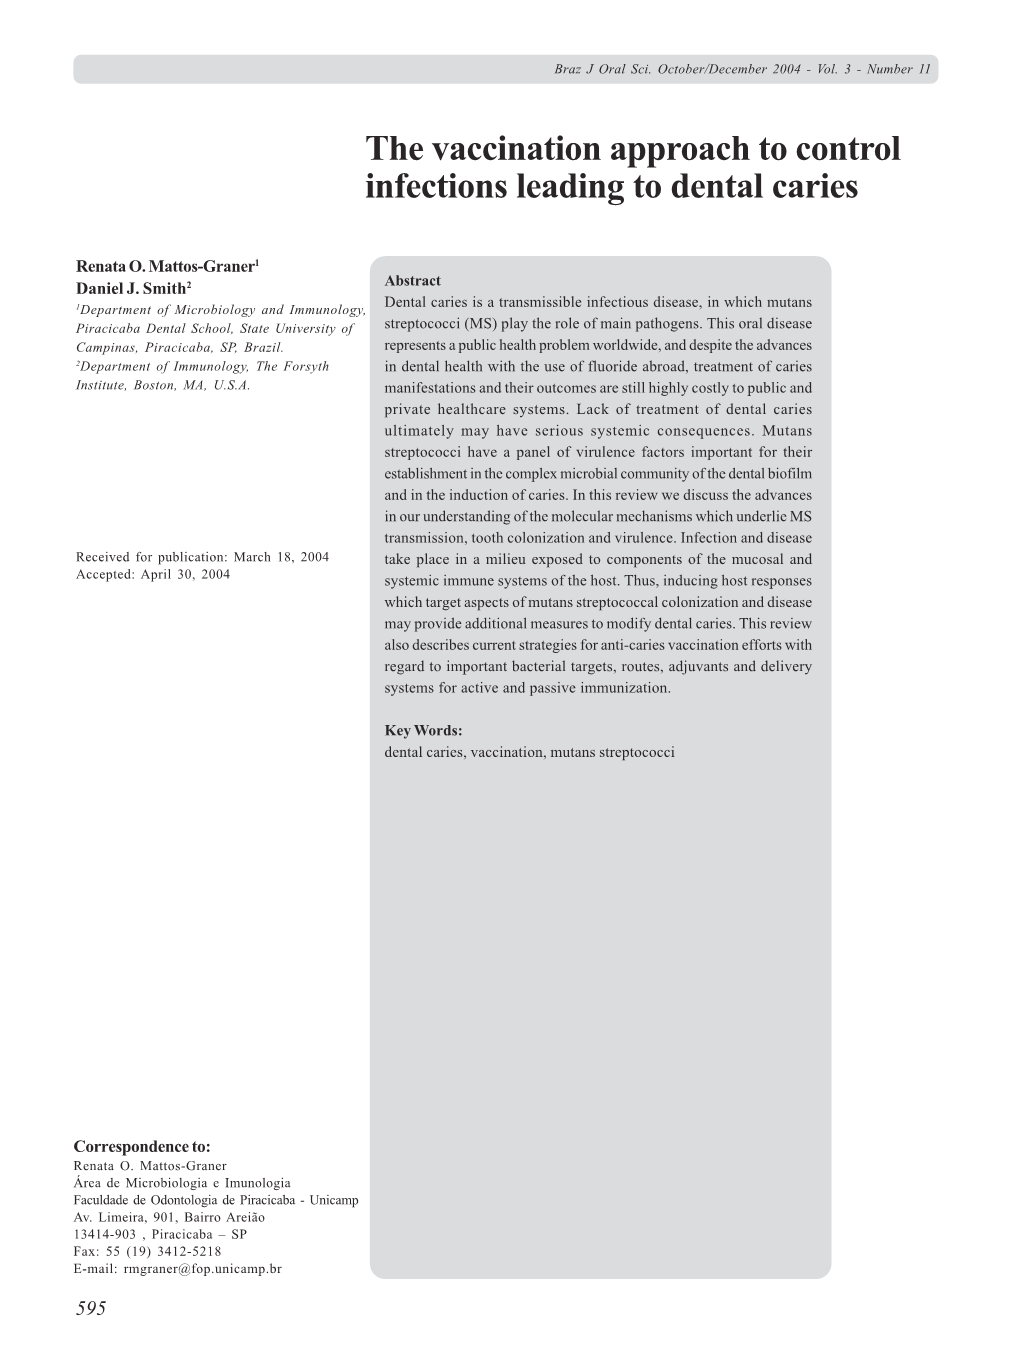 The Vaccination Approach to Controlinfections Leading to Dental Caries